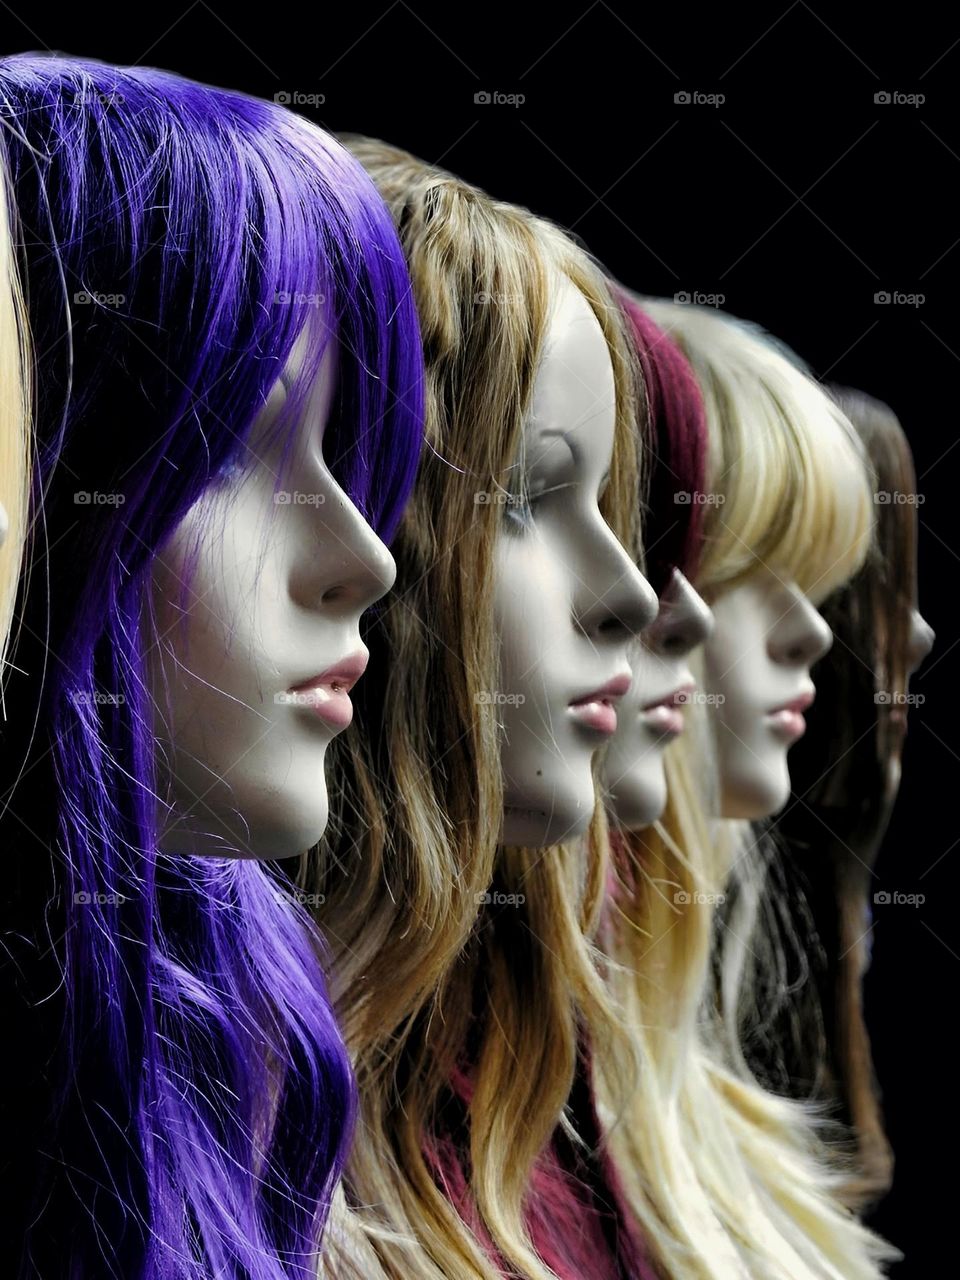 Coloured wigs adorn mannequins in beauty parlor